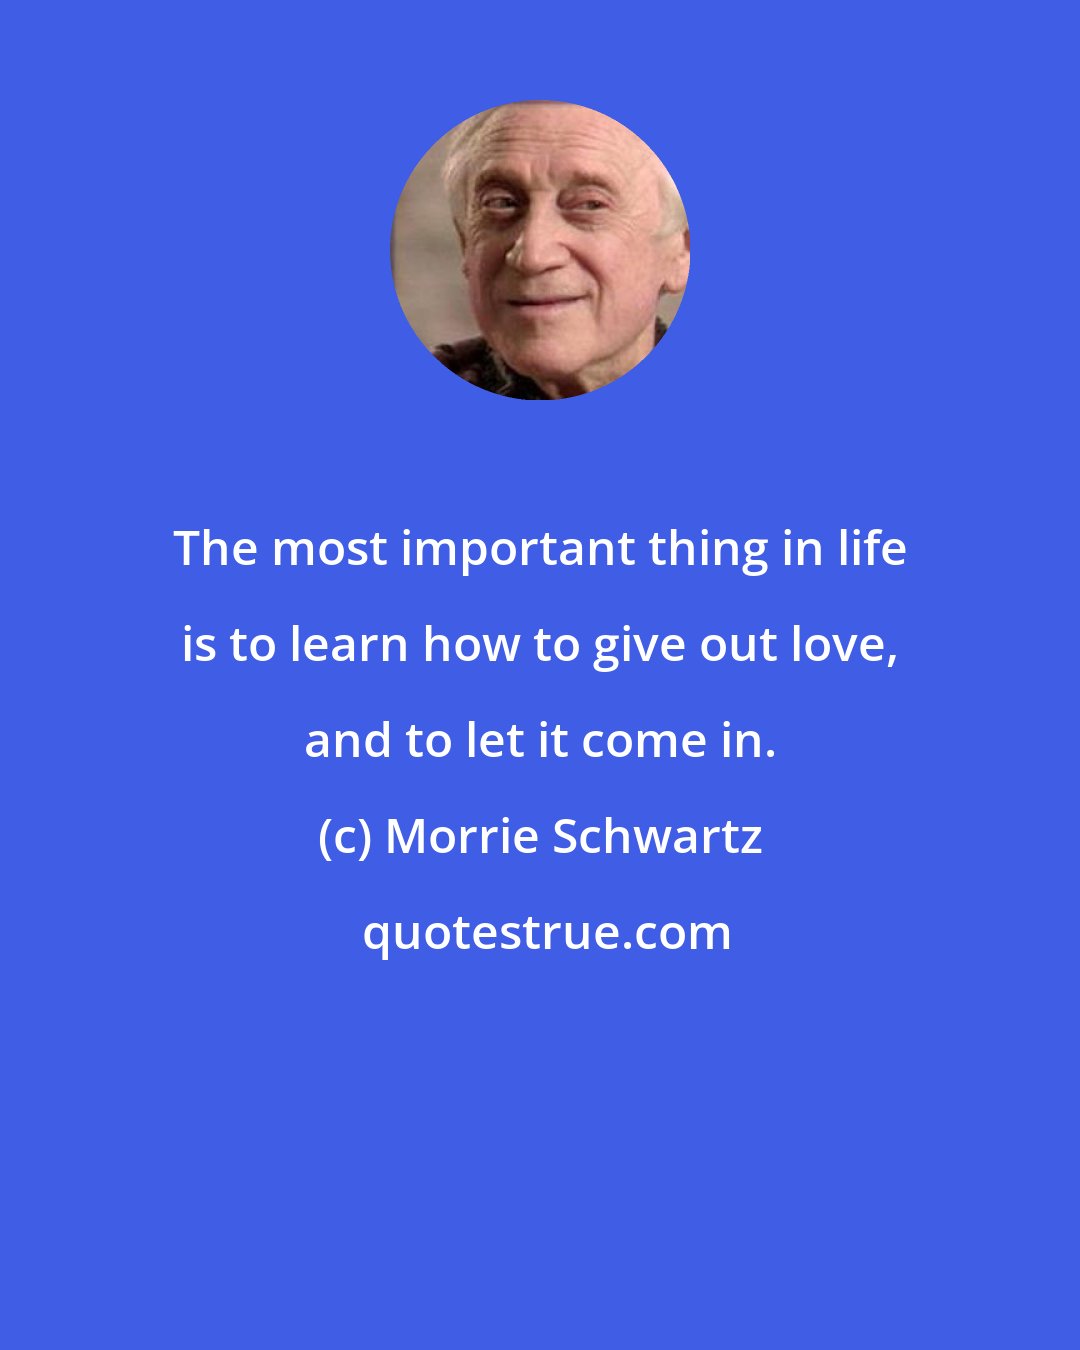 Morrie Schwartz: The most important thing in life is to learn how to give out love, and to let it come in.